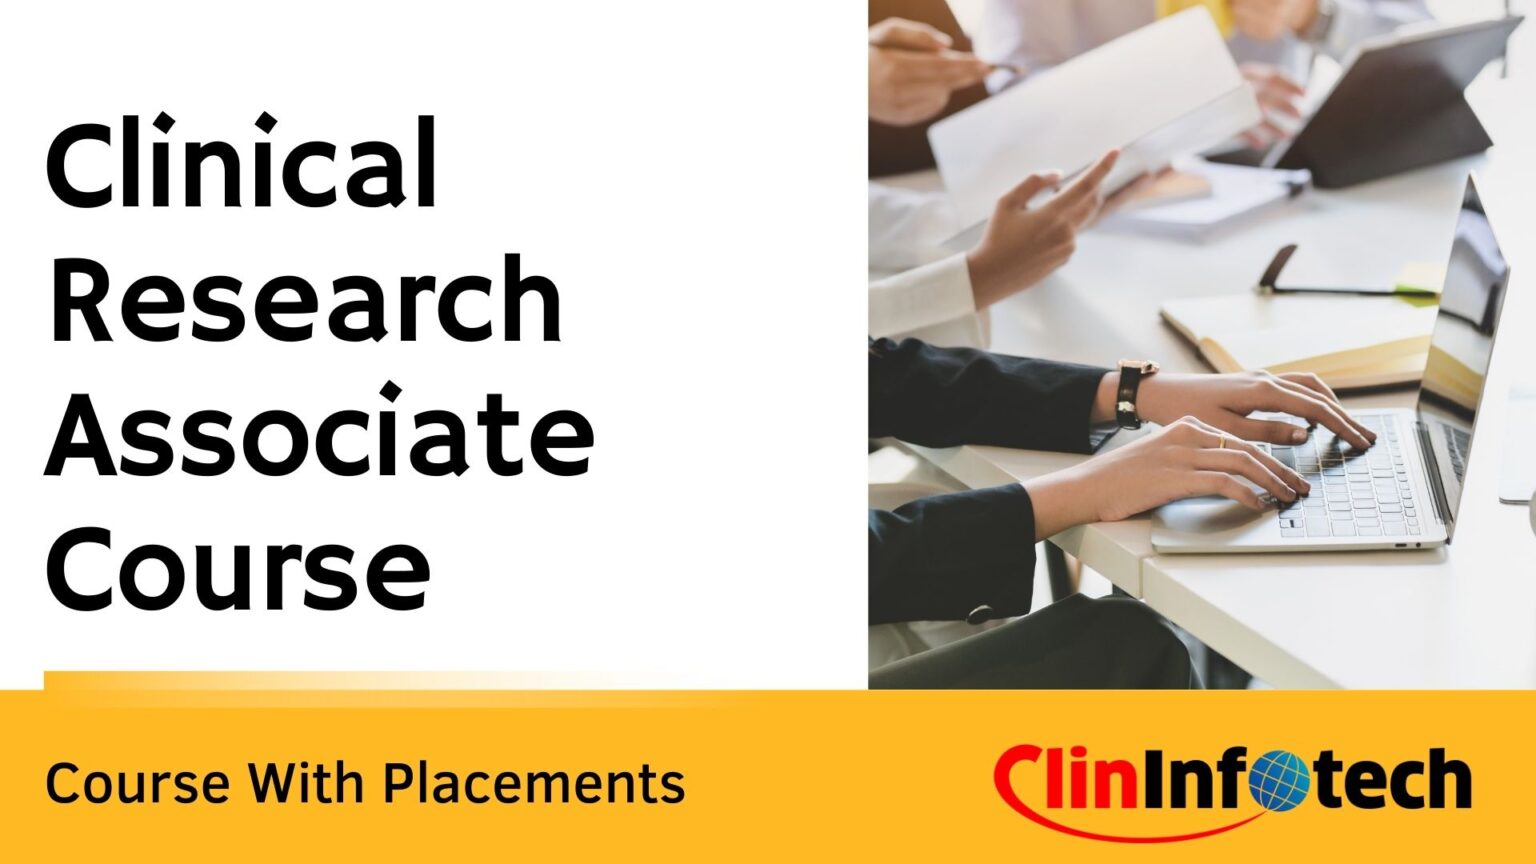 clinical research associate course